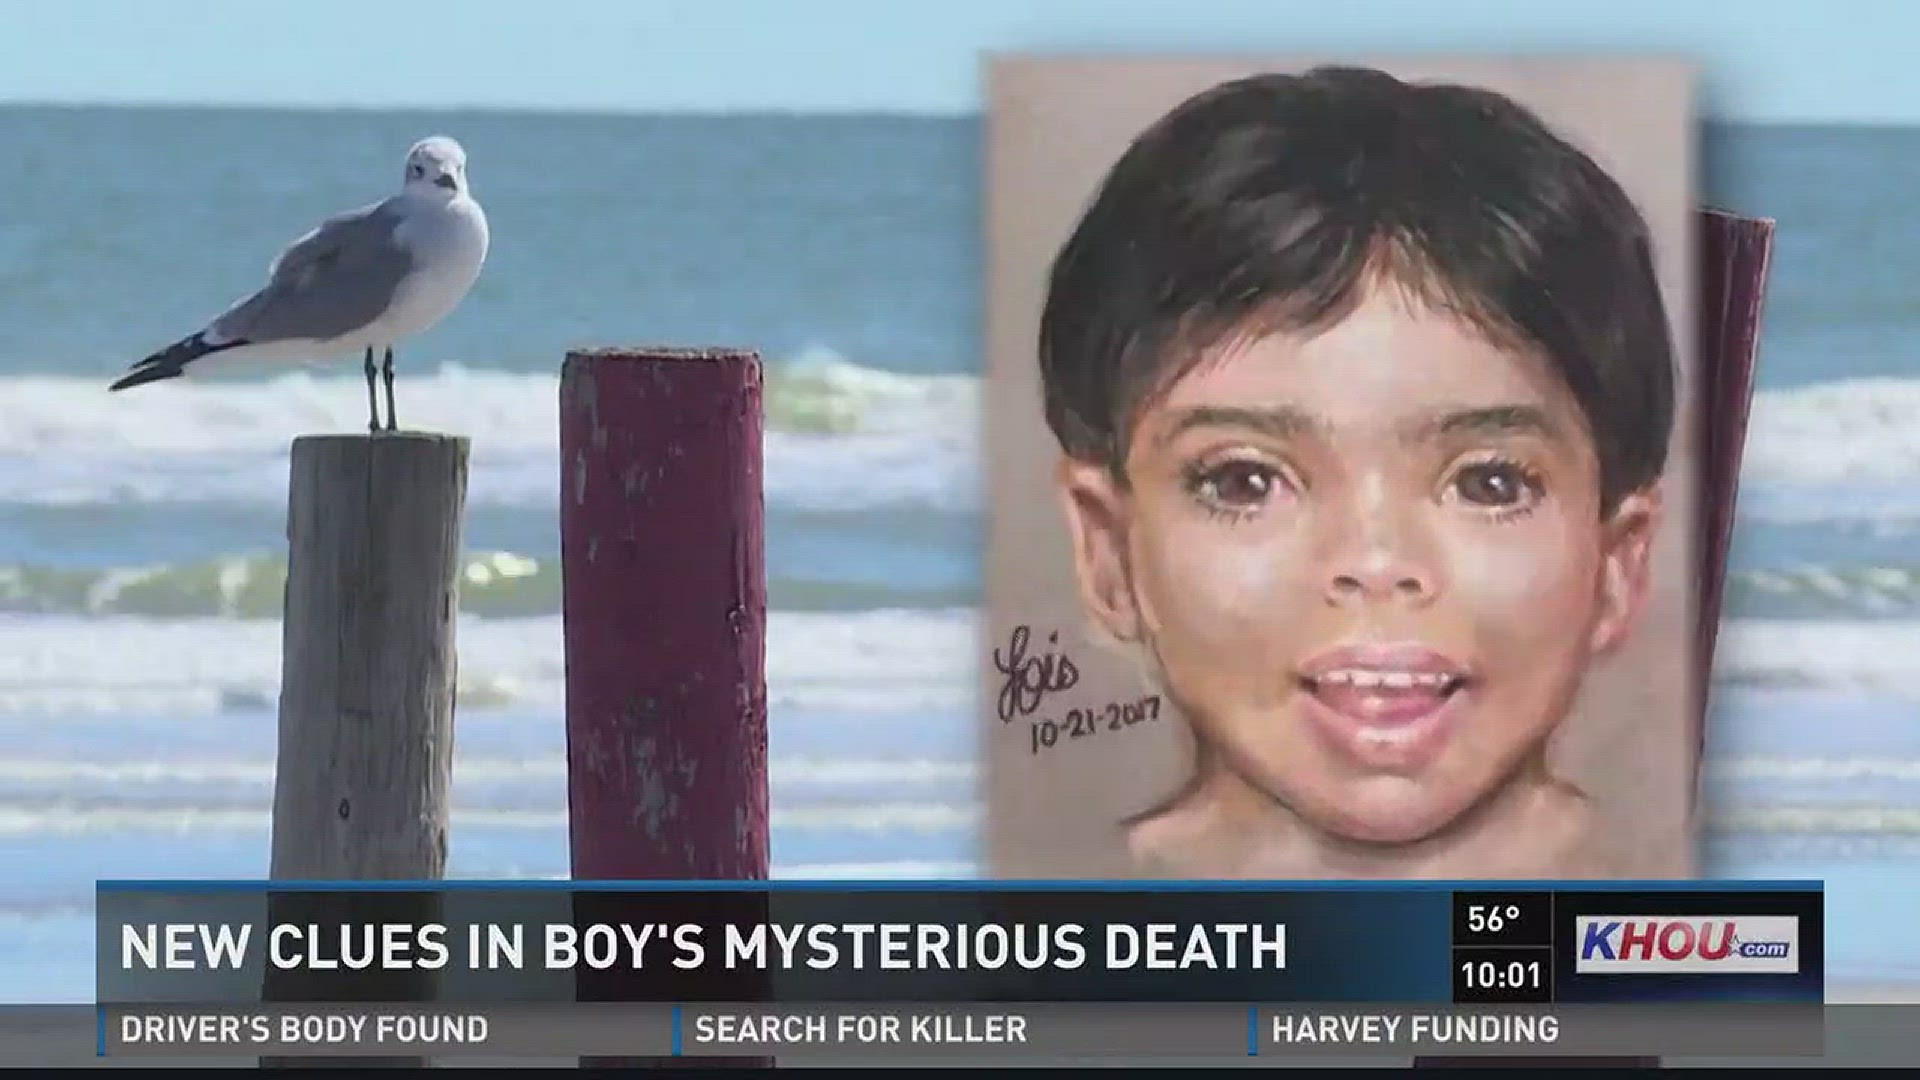 On Thursday, Galveston Police released new details from investigators into the tragic case of the toddler found dead on a Galveston beach nearly two months ago.